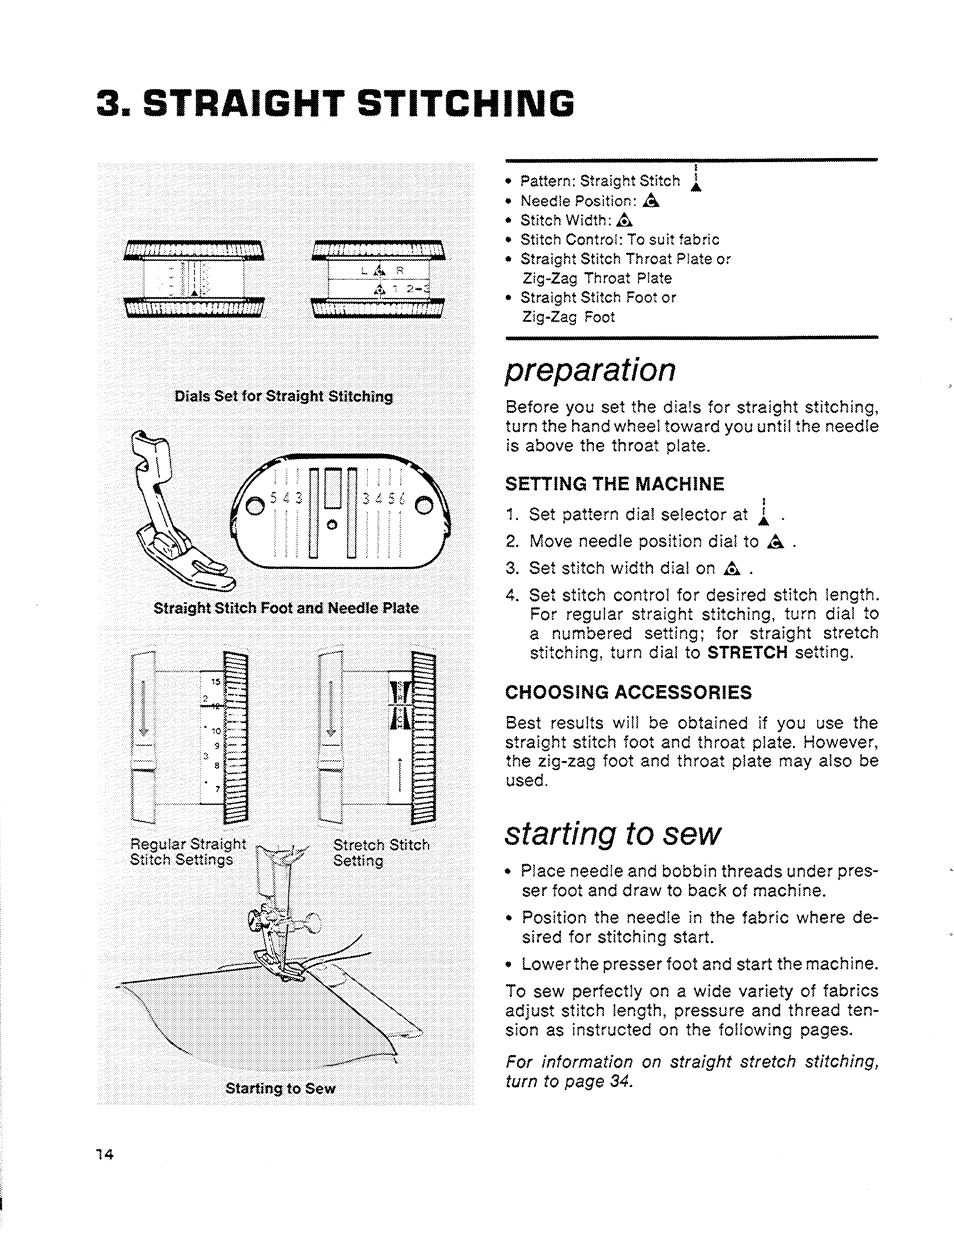 Straight stitching, Preparation, Setting the machine | Choosing accessories, Starting to sew, Preparation starting to sew | SINGER 714 Graduate User Manual | Page 16 / 52